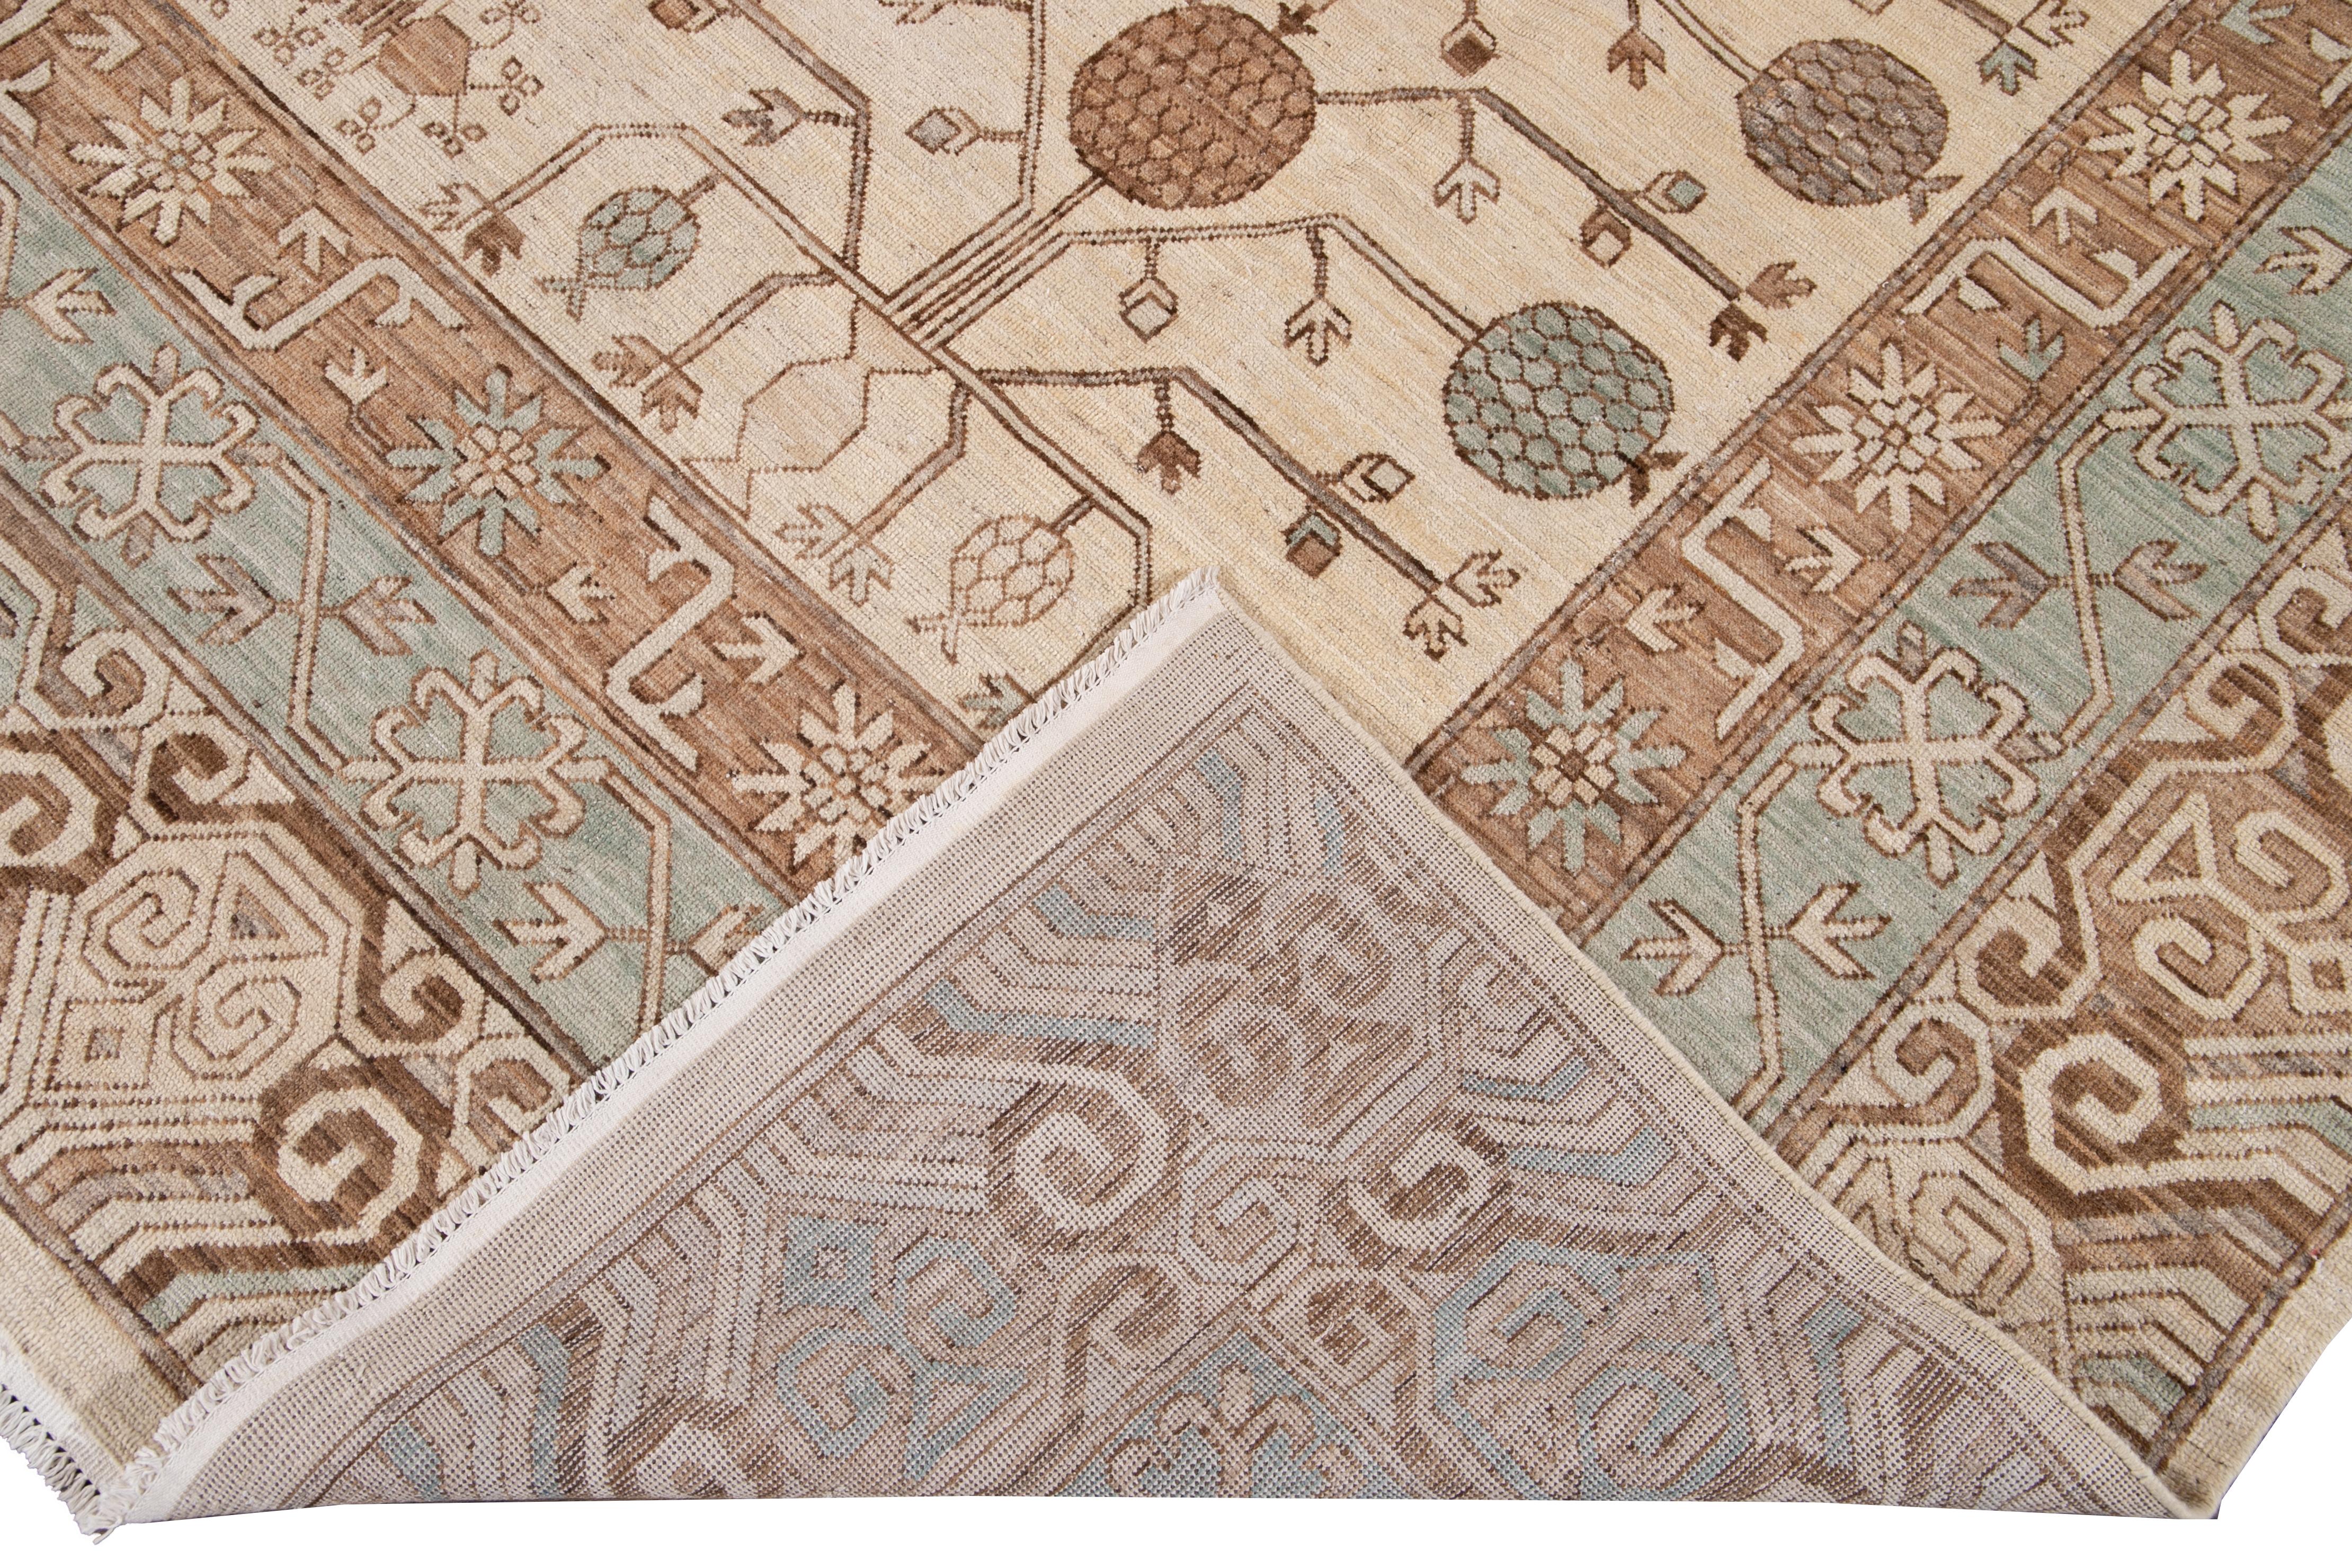 Beautiful Modern Khotan style hand knotted wool rug beige field. This Khotan-style rug has a beautifully designed frame and accent of blue, beige, and brown in a gorgeous all-over geometric floral design.

This rug measures 9' 6